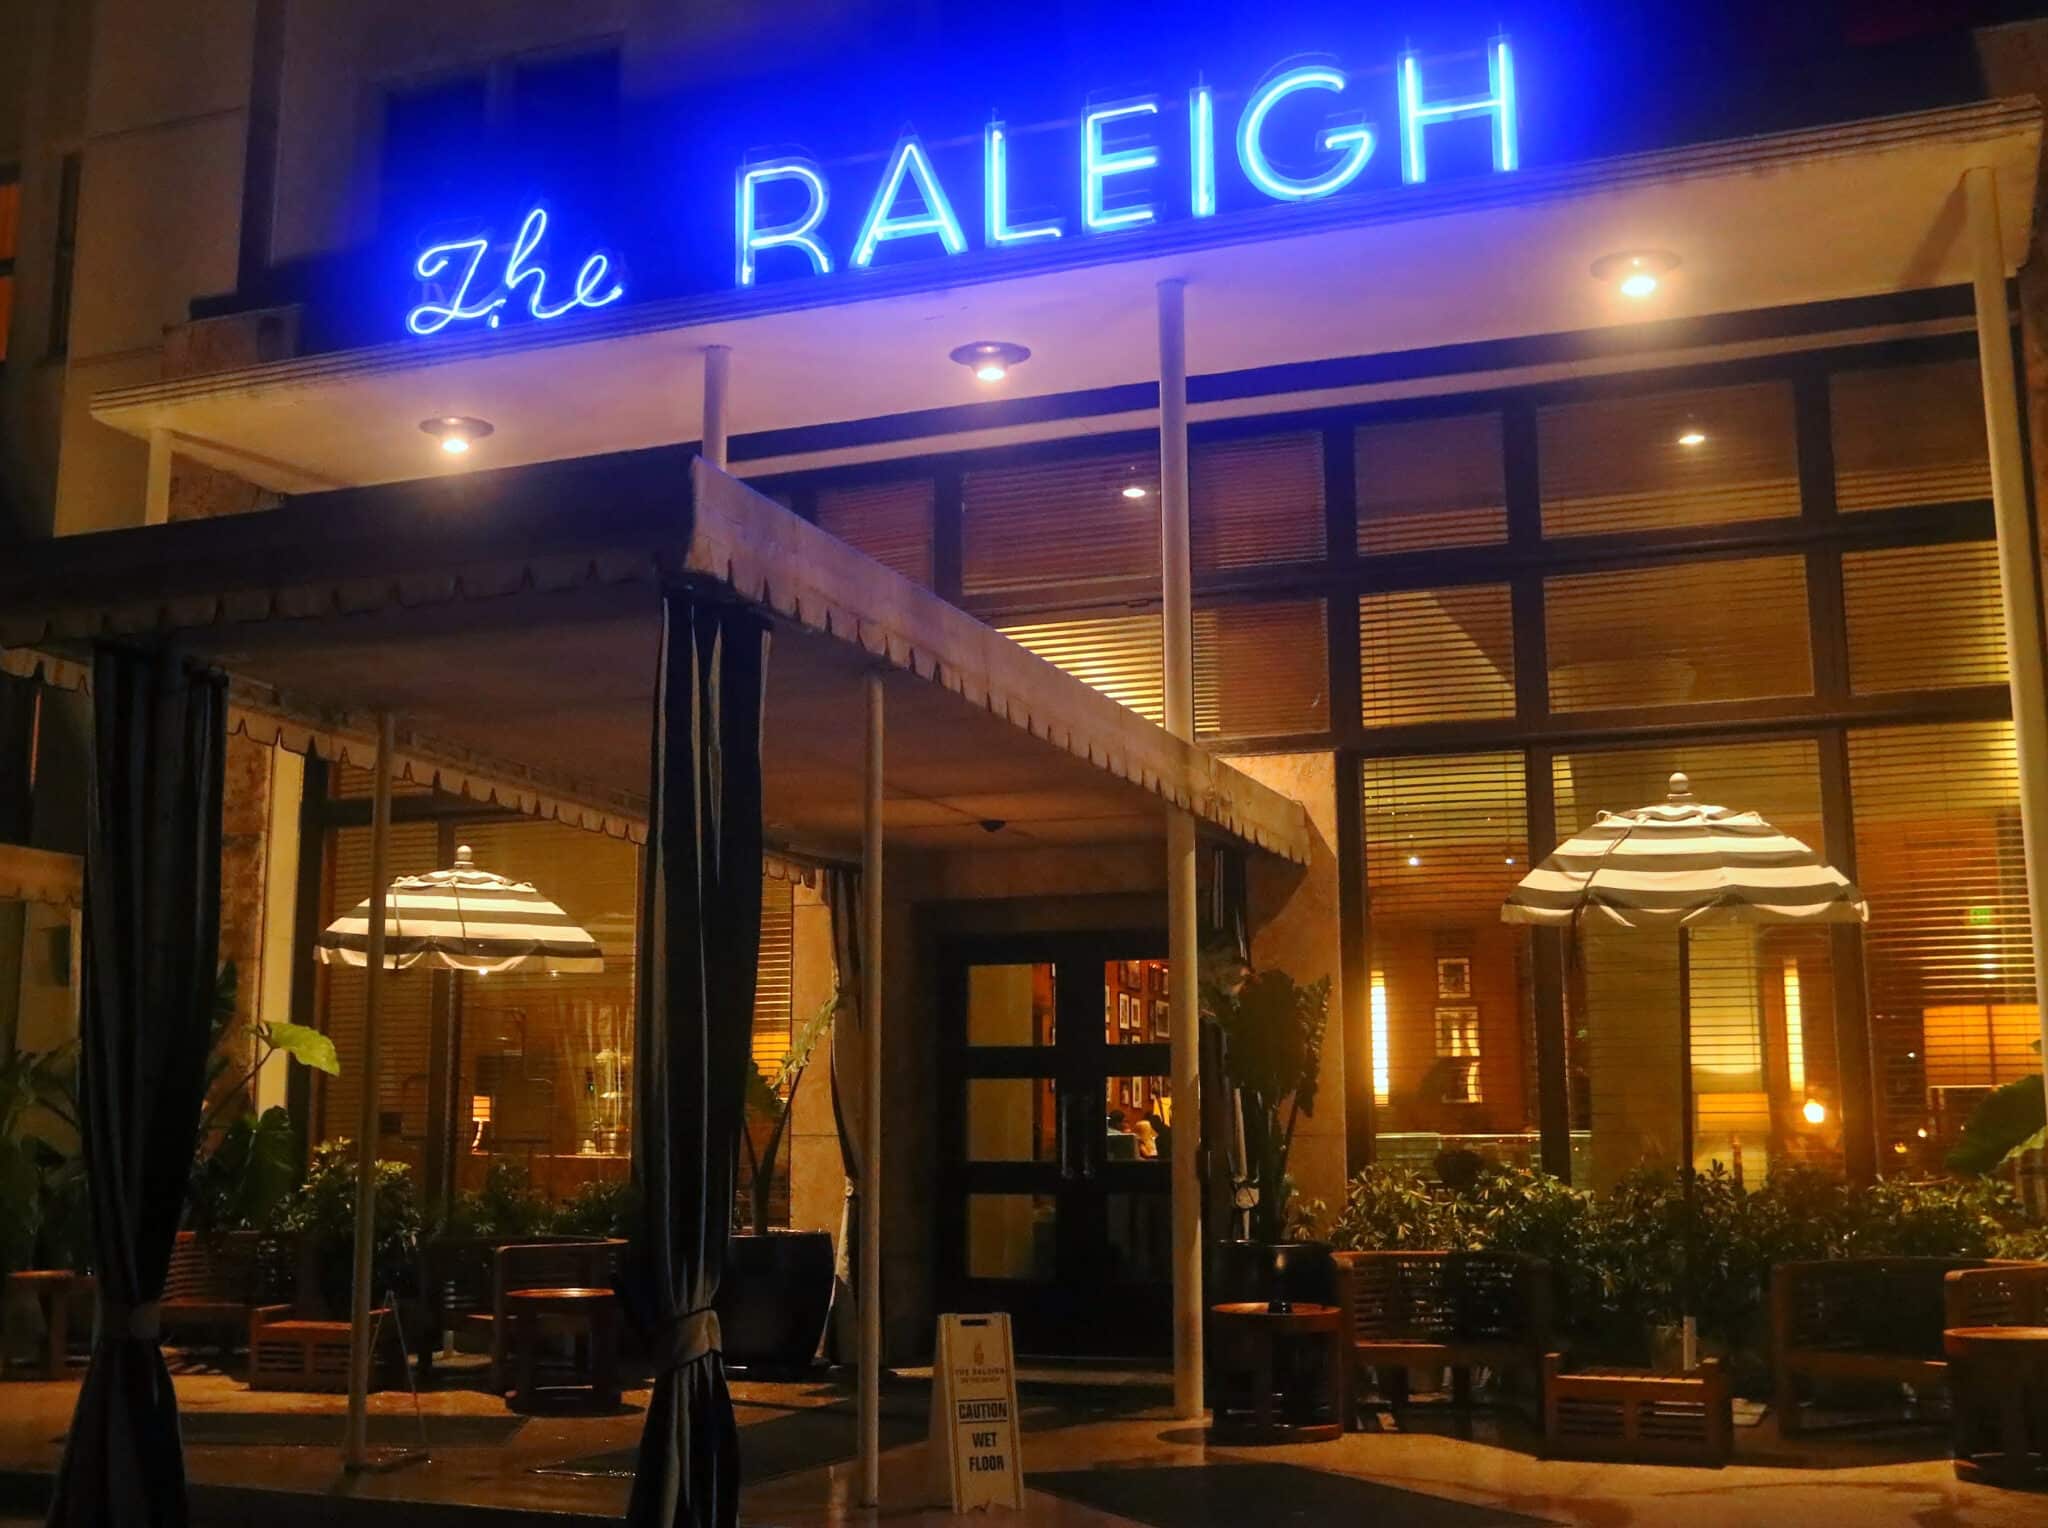 The Raleigh hotel by night (Credit: Bill Rockwell)